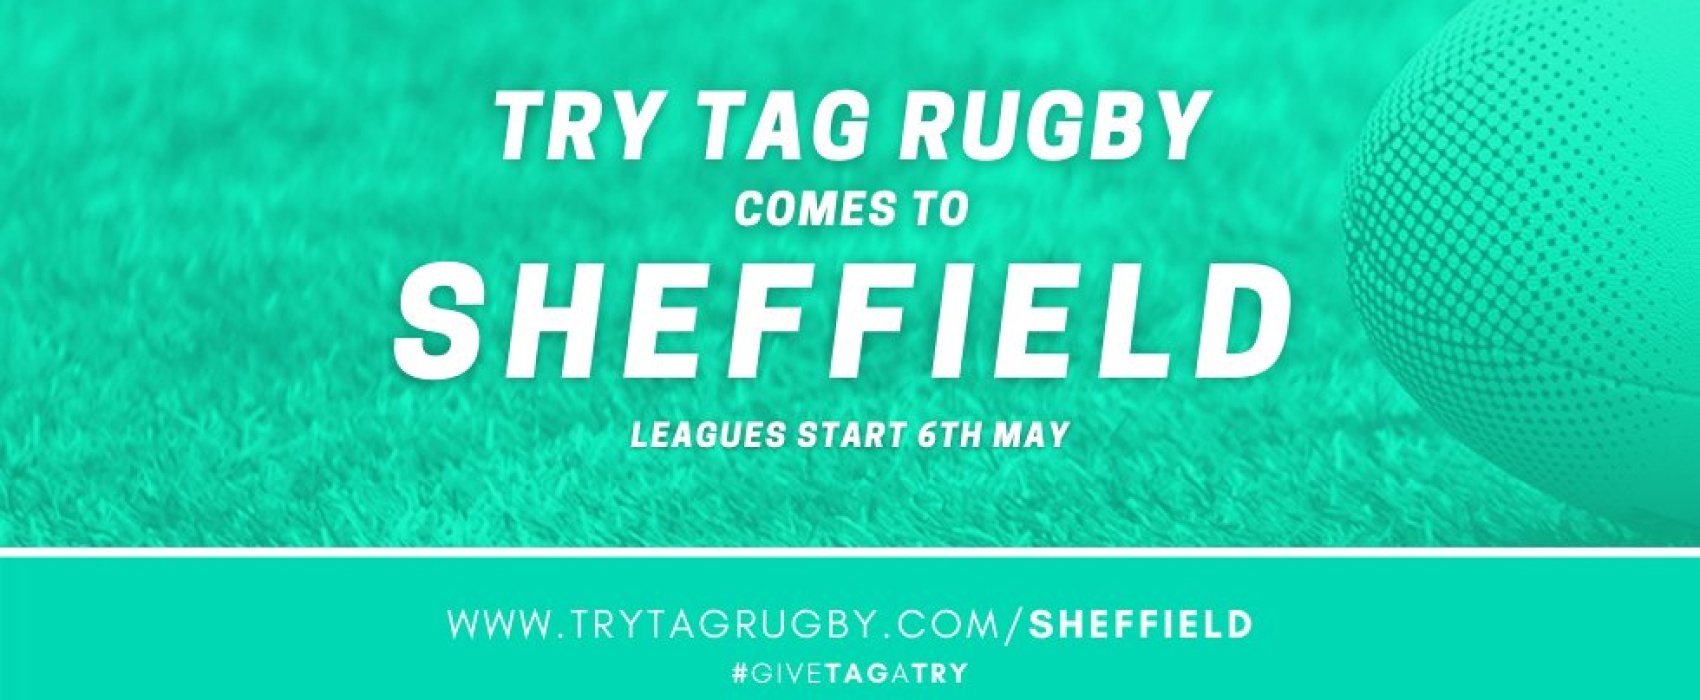 Try Tag Rugby comes to Sheffield